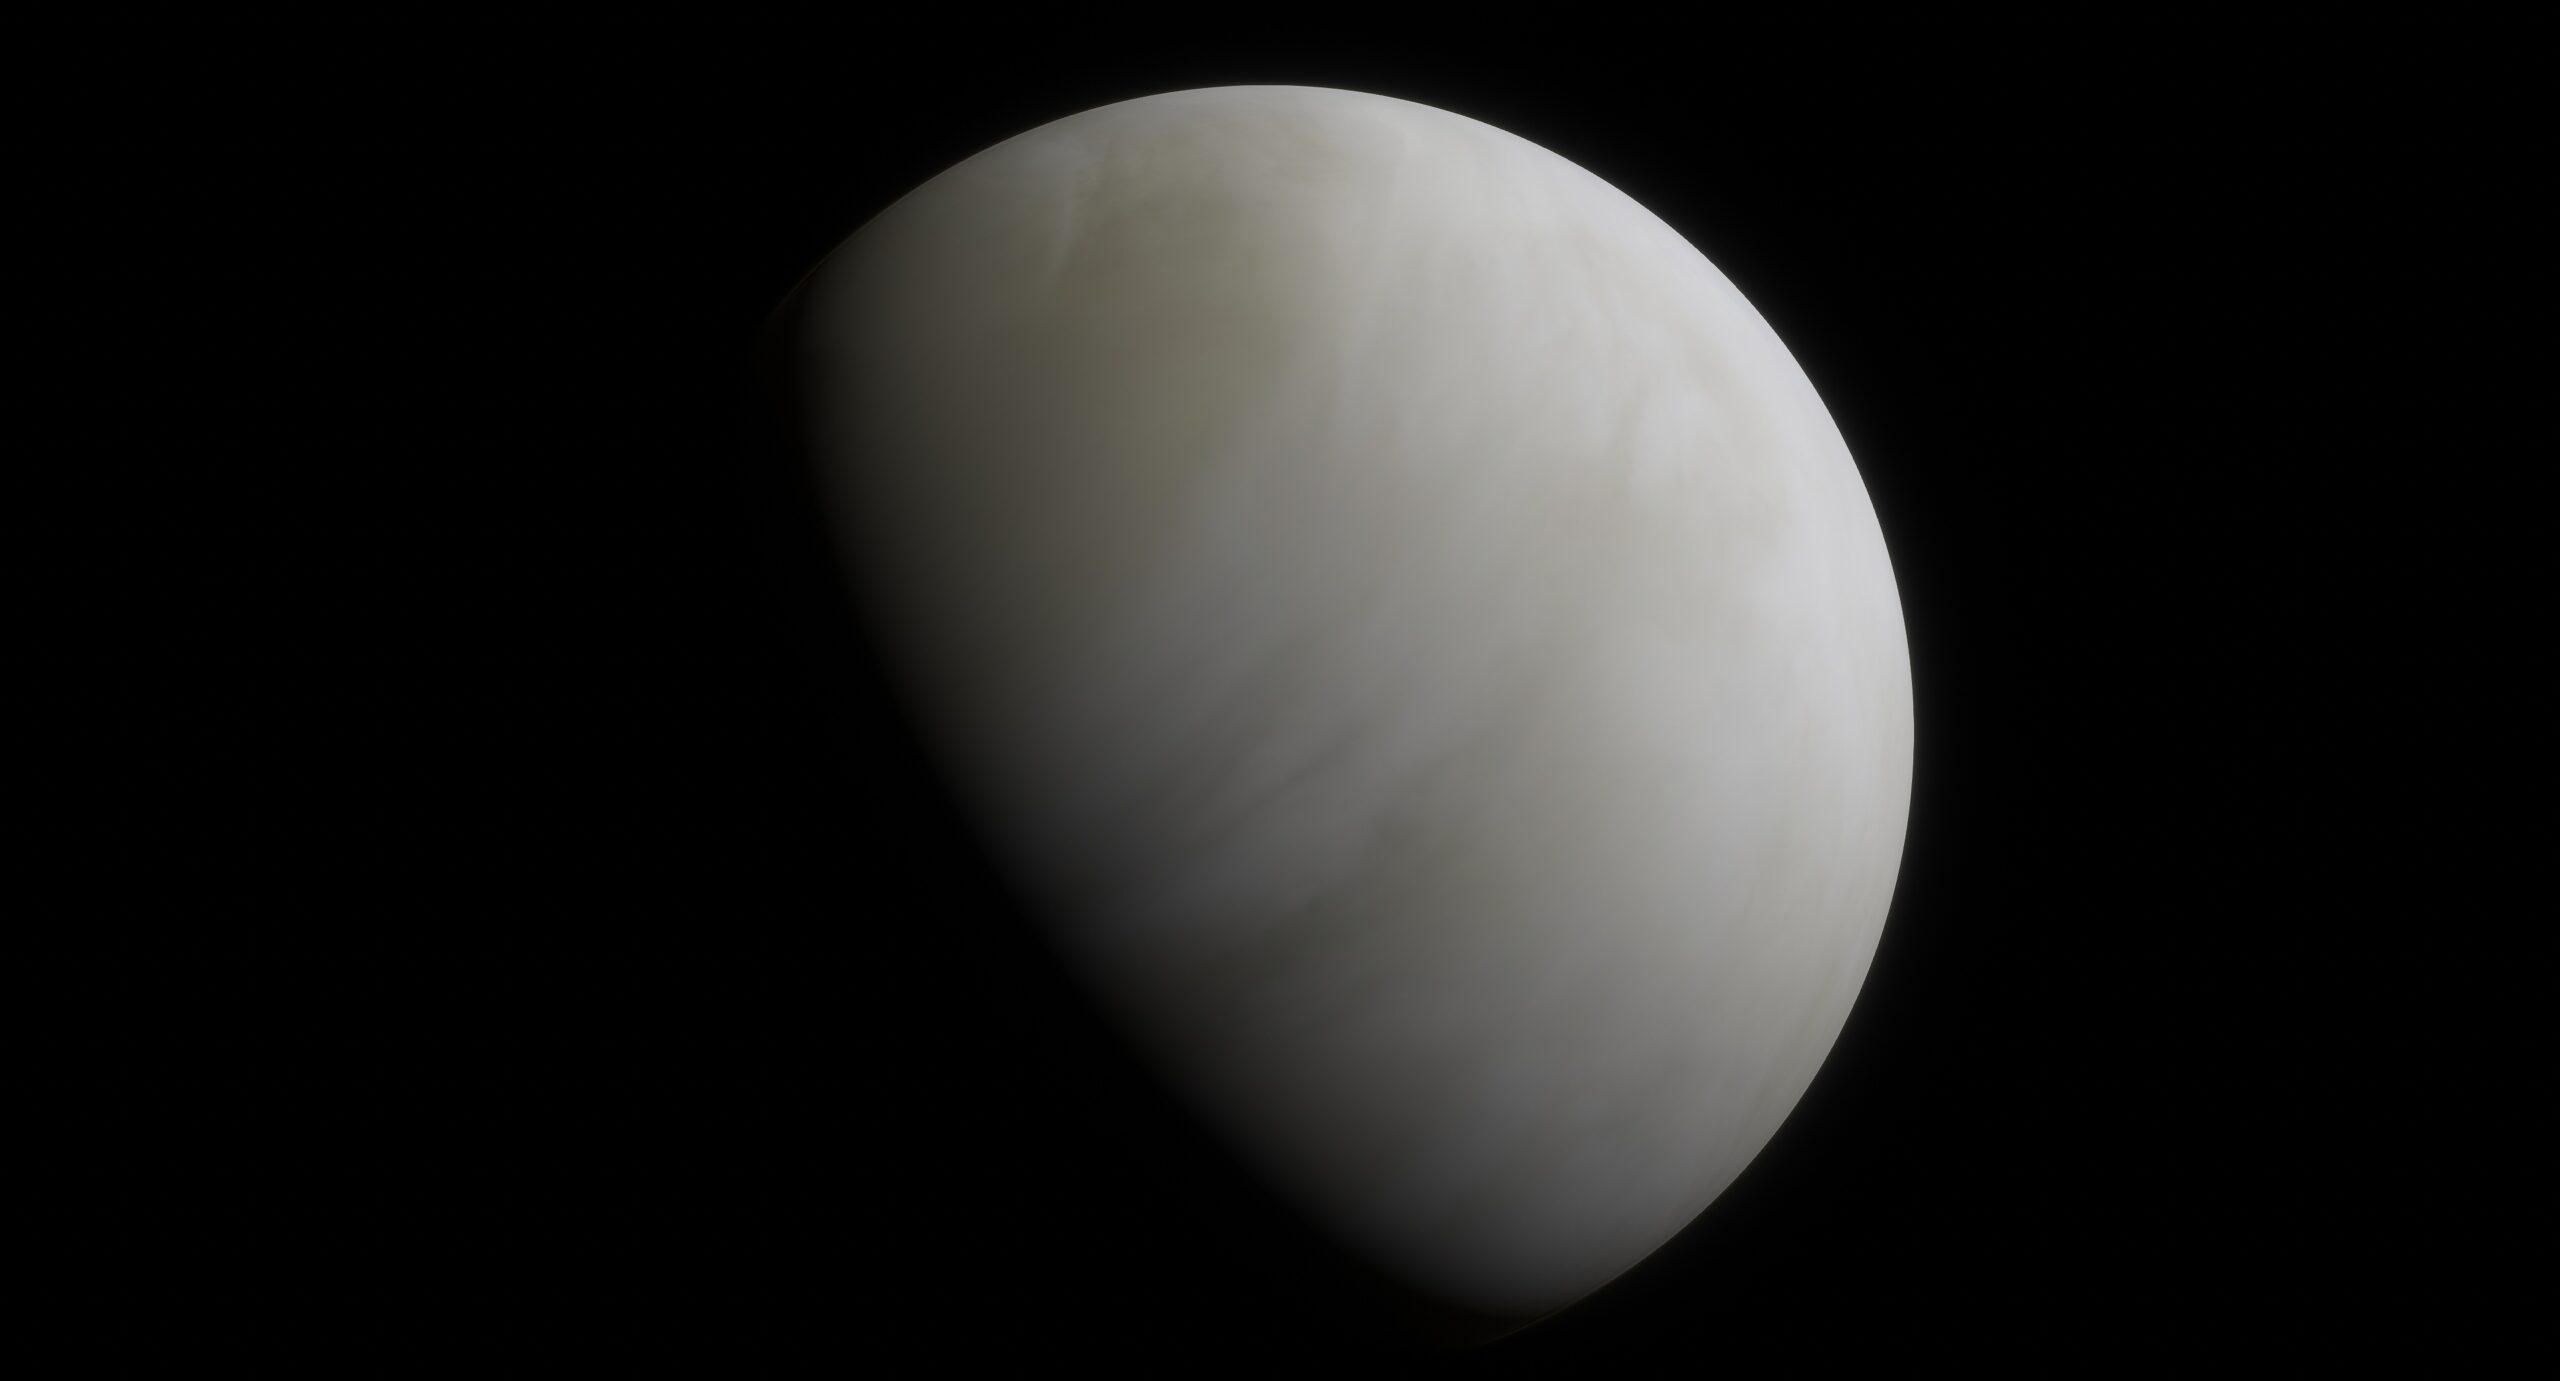 Venus’ volcanic activity turns out to be similar to Earth’s